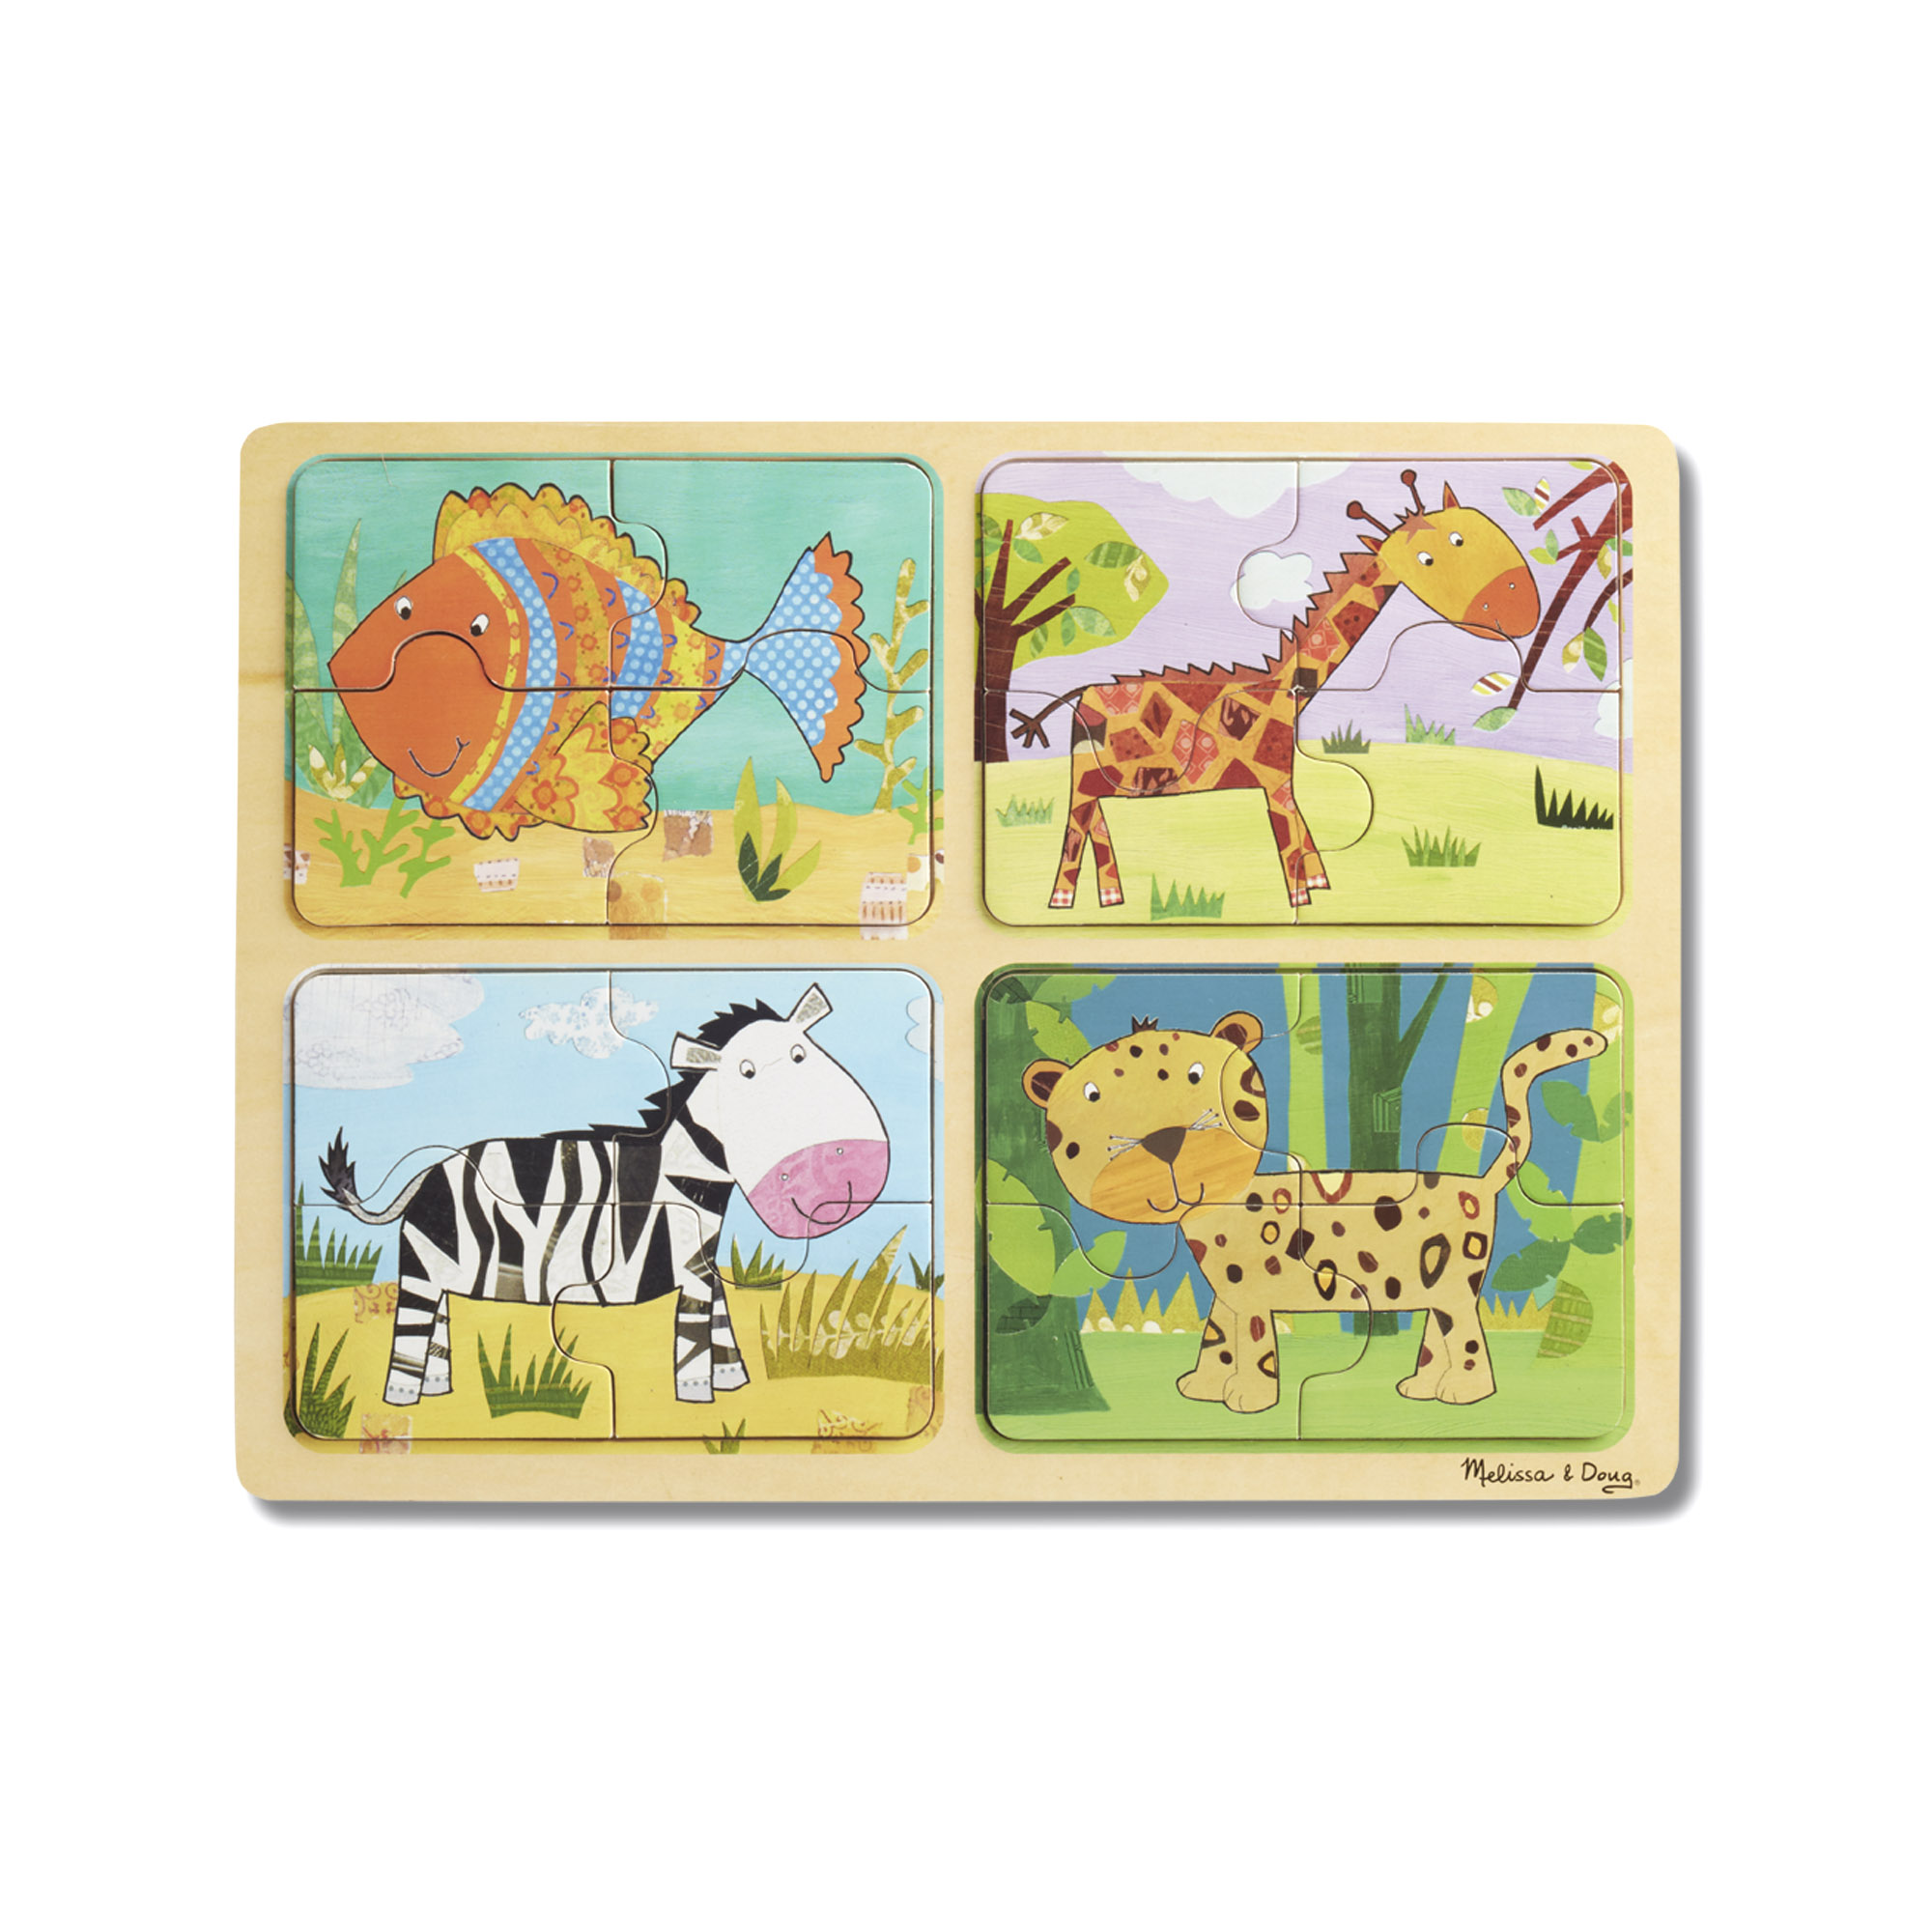 Melissa & Doug Natural Play Wooden Puzzle: Animal Patterns (Four 4-Piece Animal Puzzles) - image 1 of 5